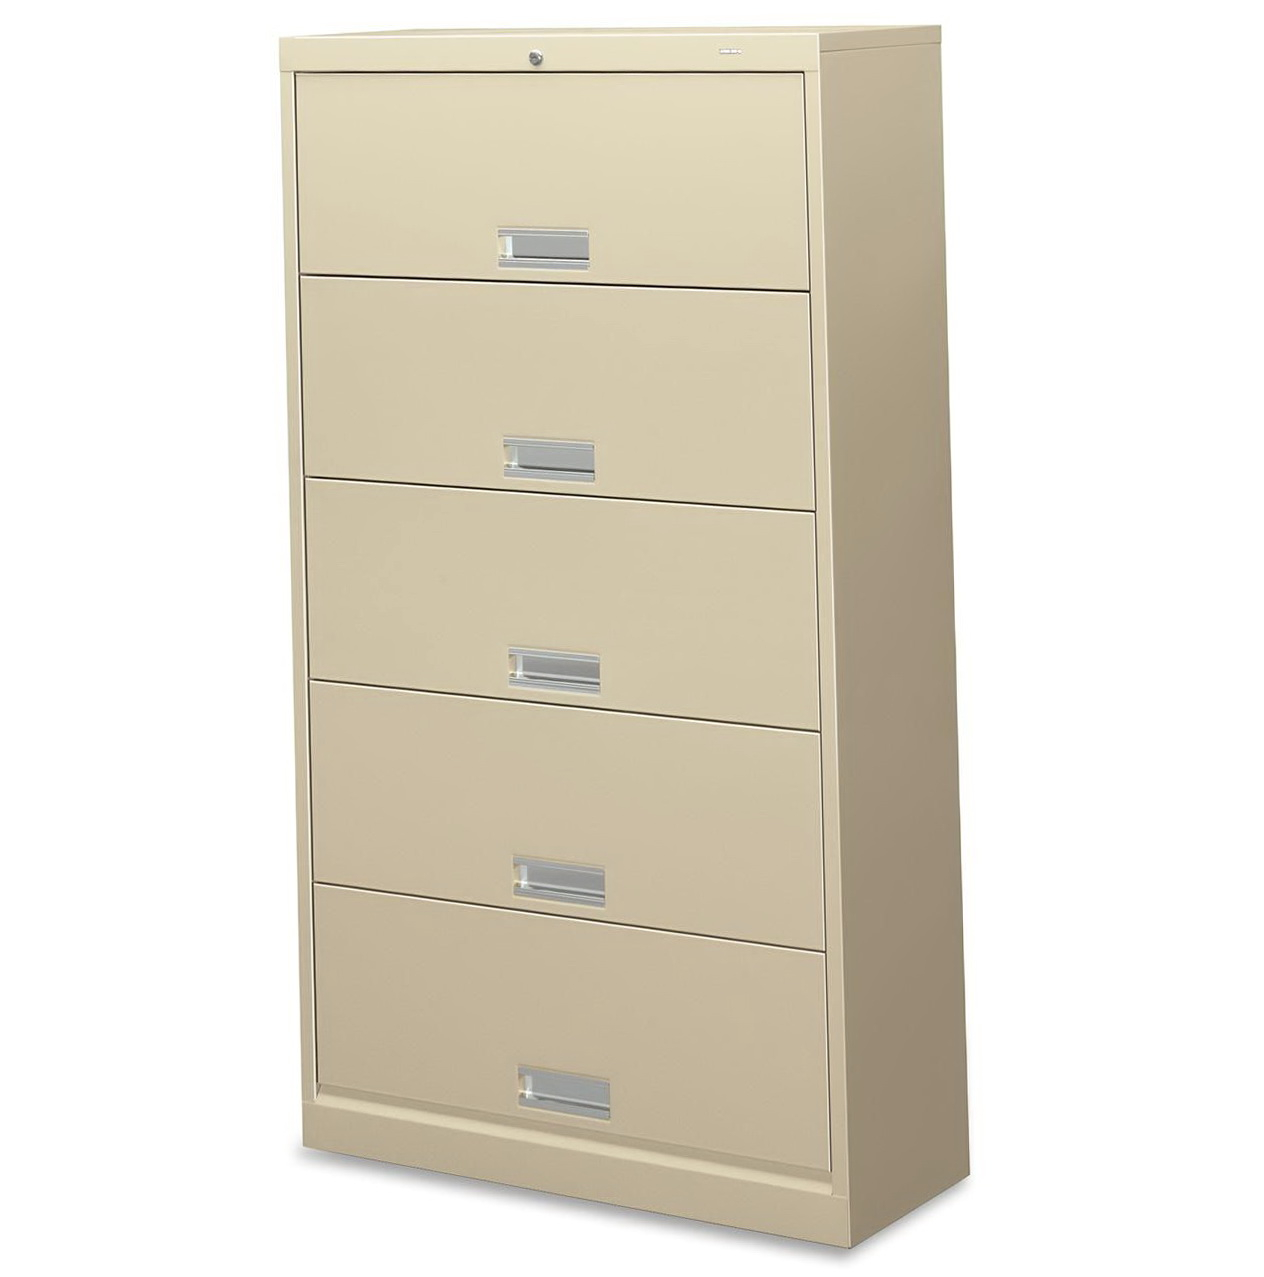 Hon File Cabinet Lock Removal Cabinet 38779 Home Design Ideas throughout sizing 1264 X 1277